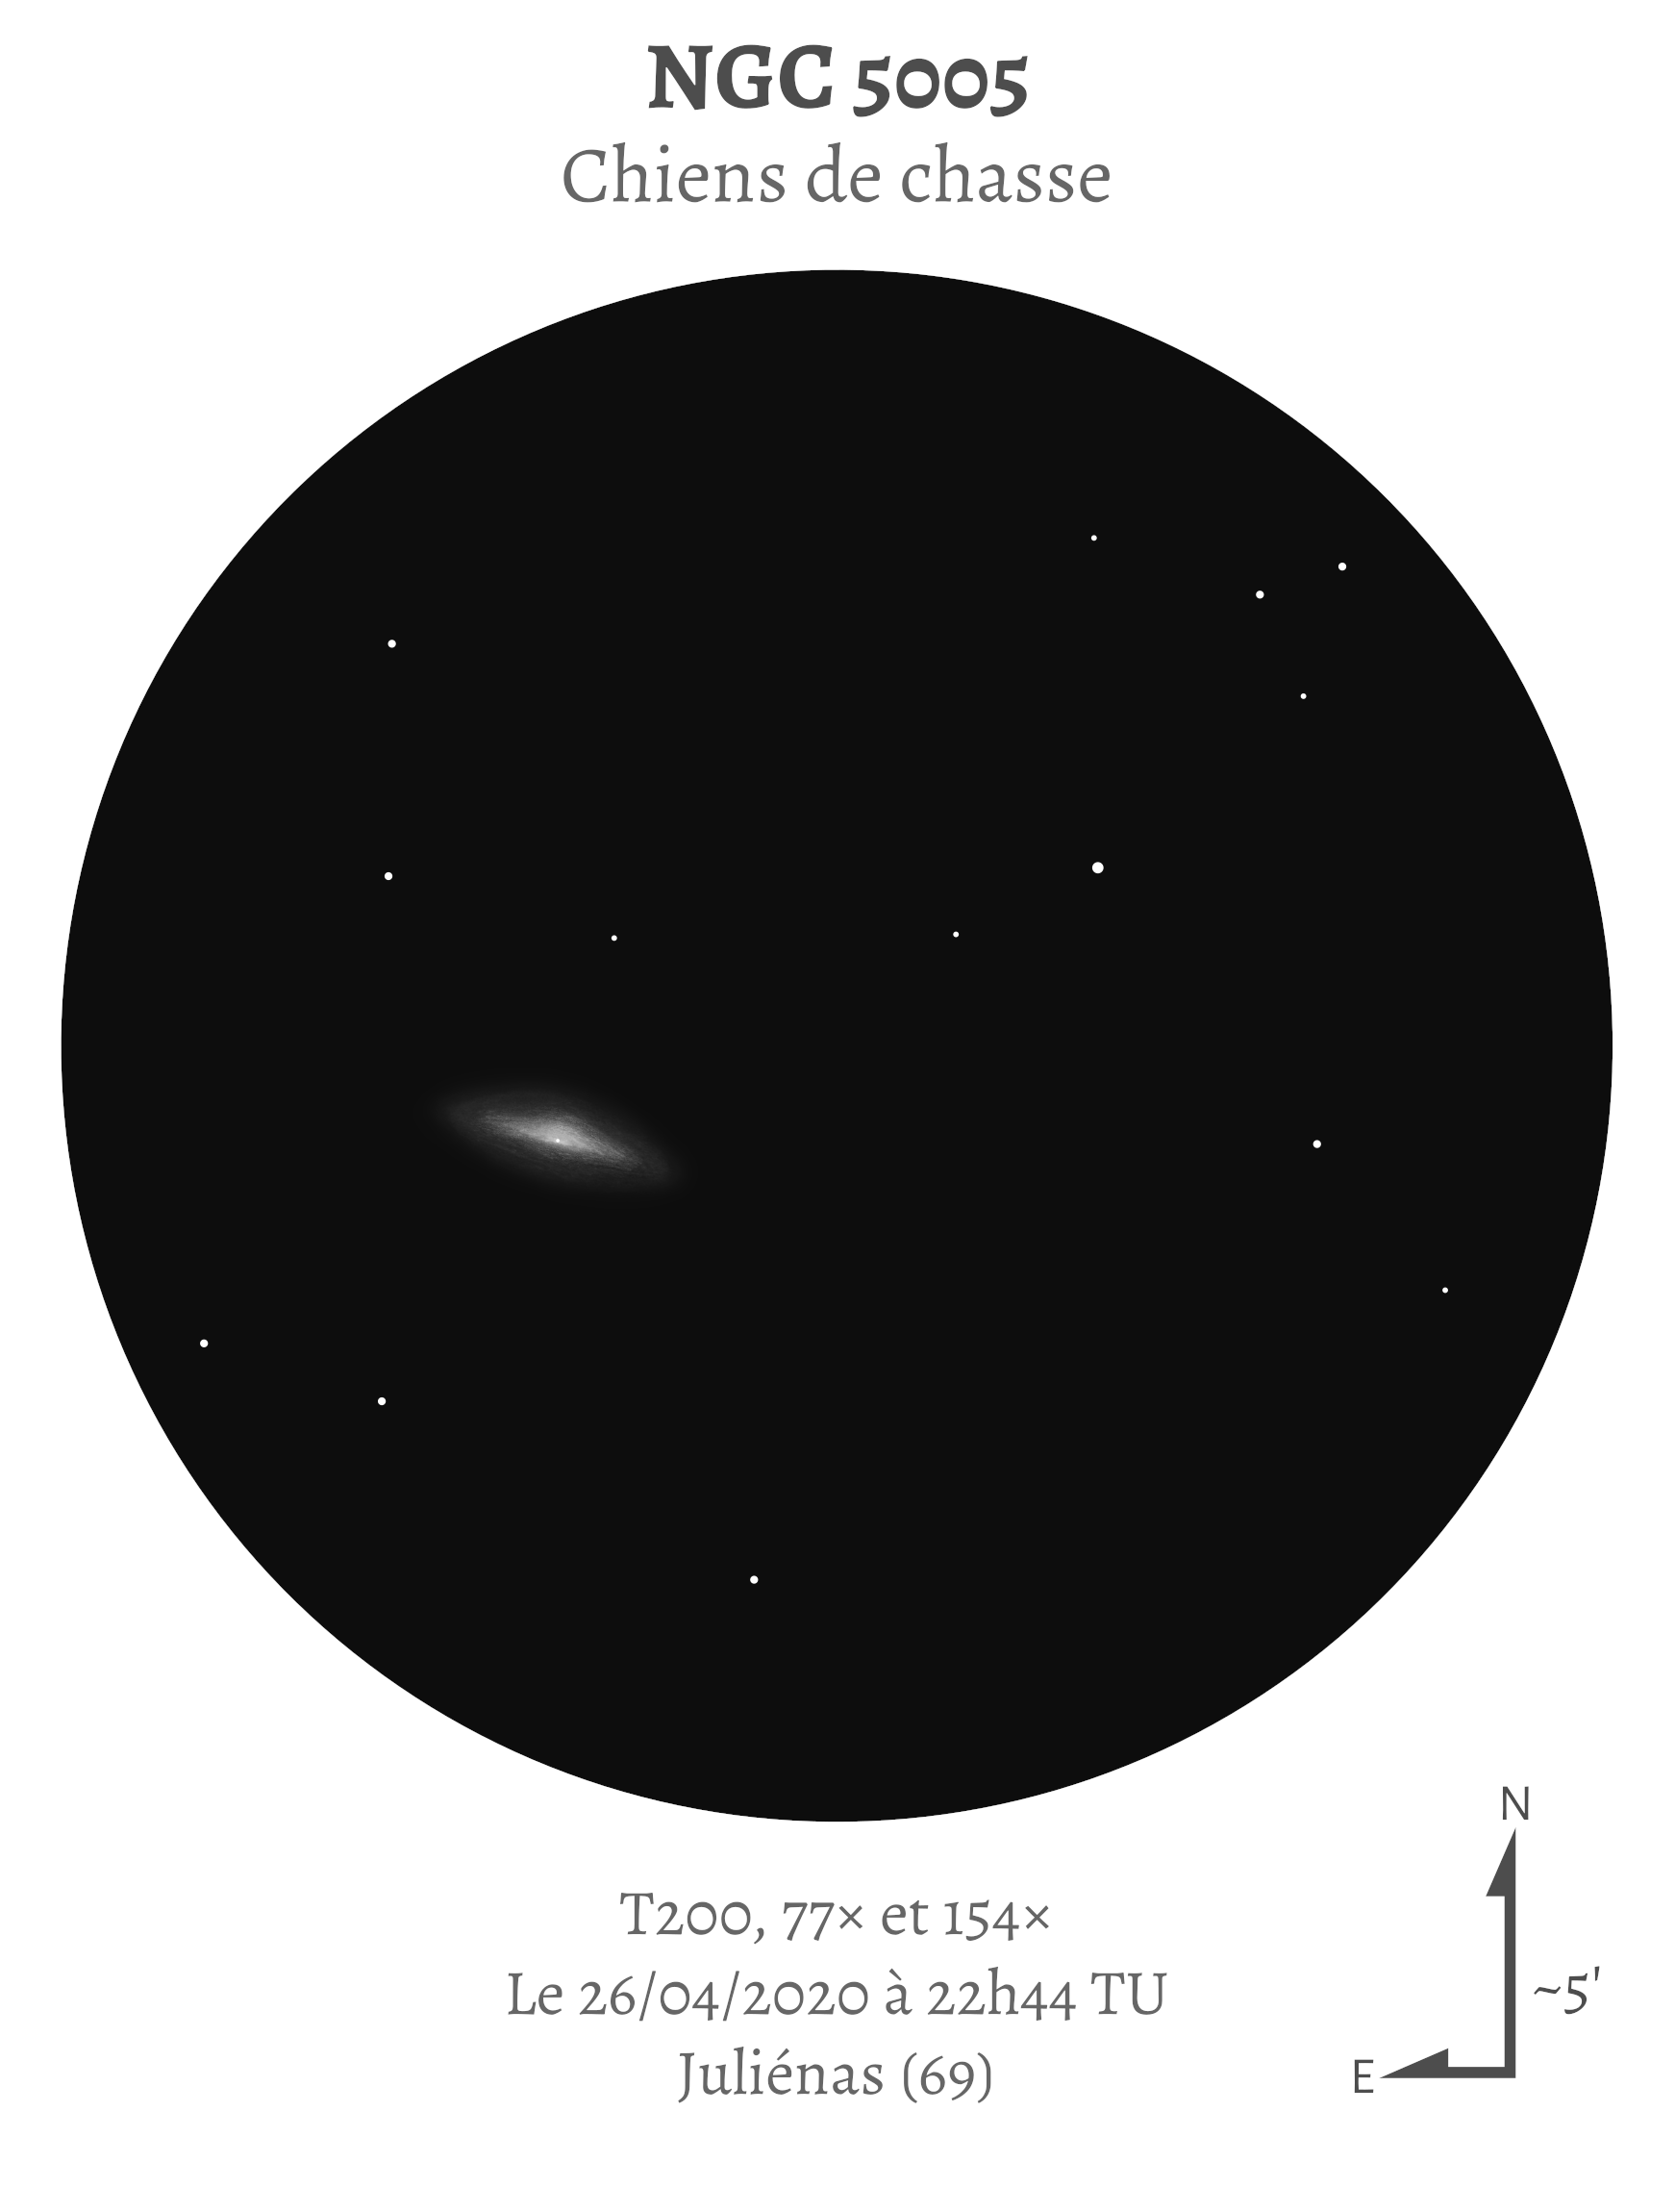 large.5ebd70abce20a_NGC5005-T200.png.7bbbb5e0d1042df7fff1d369631e80d4.png